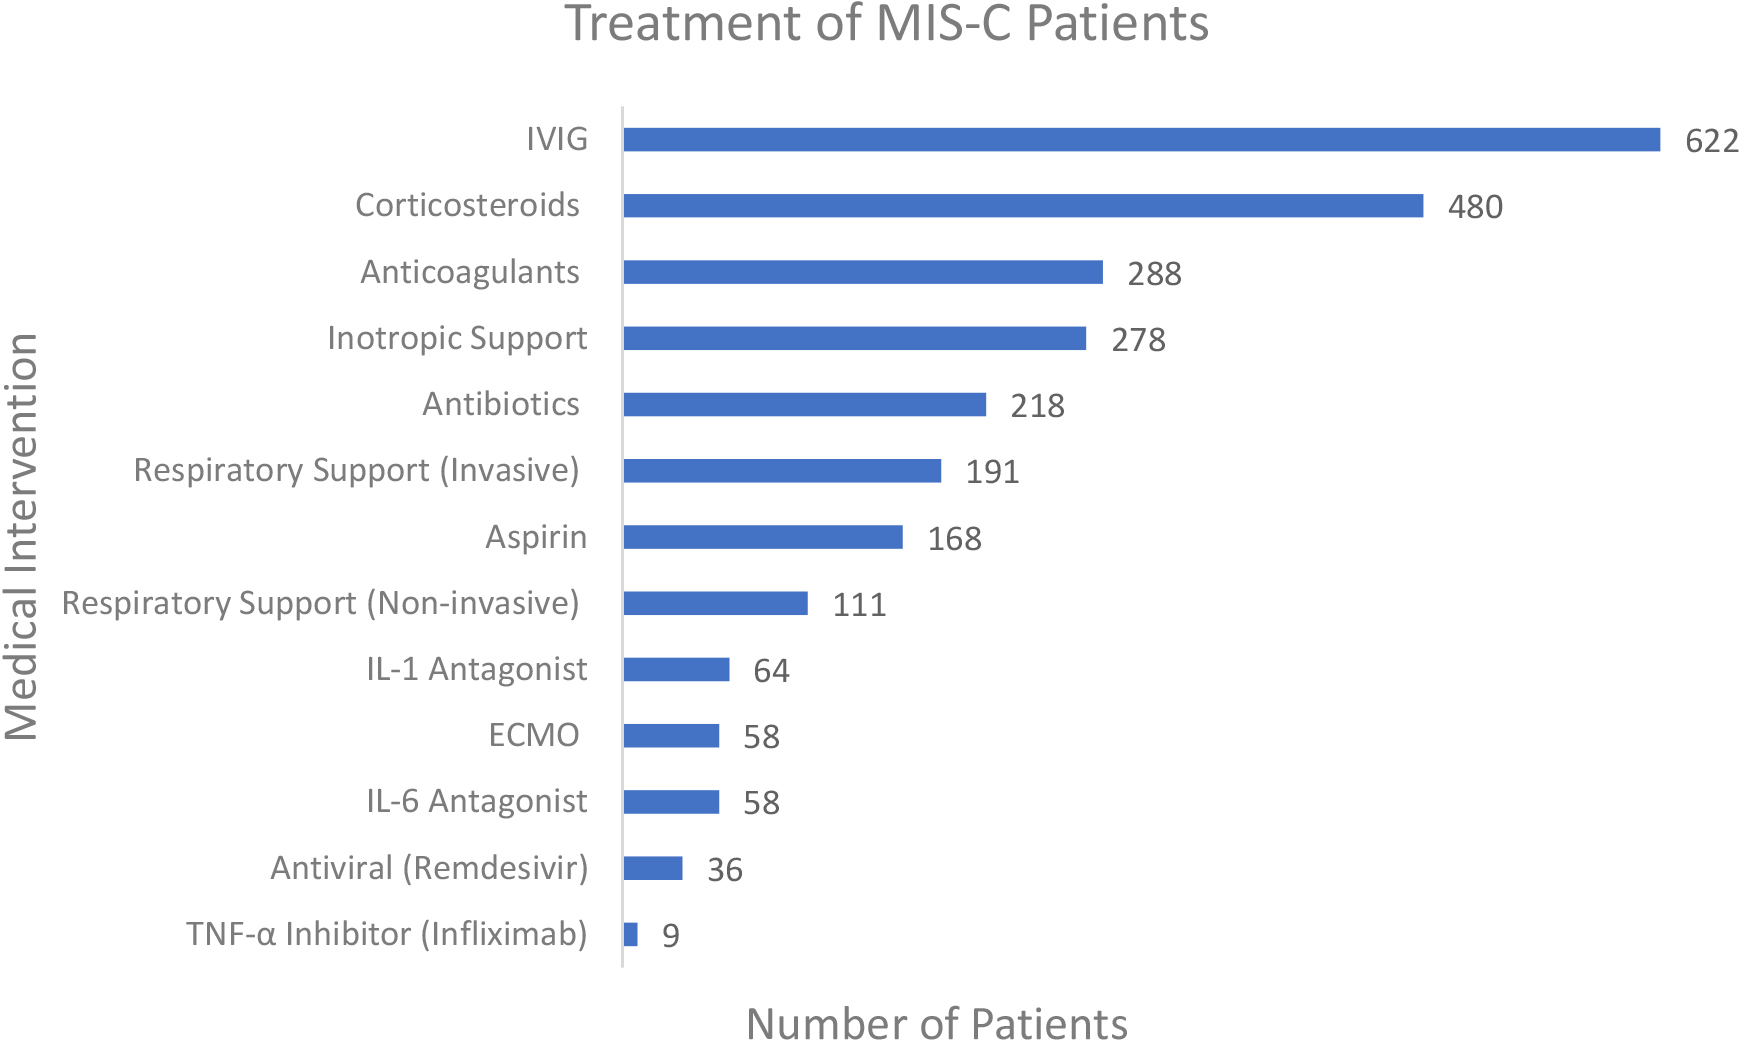 Treatment and management of patients reported.